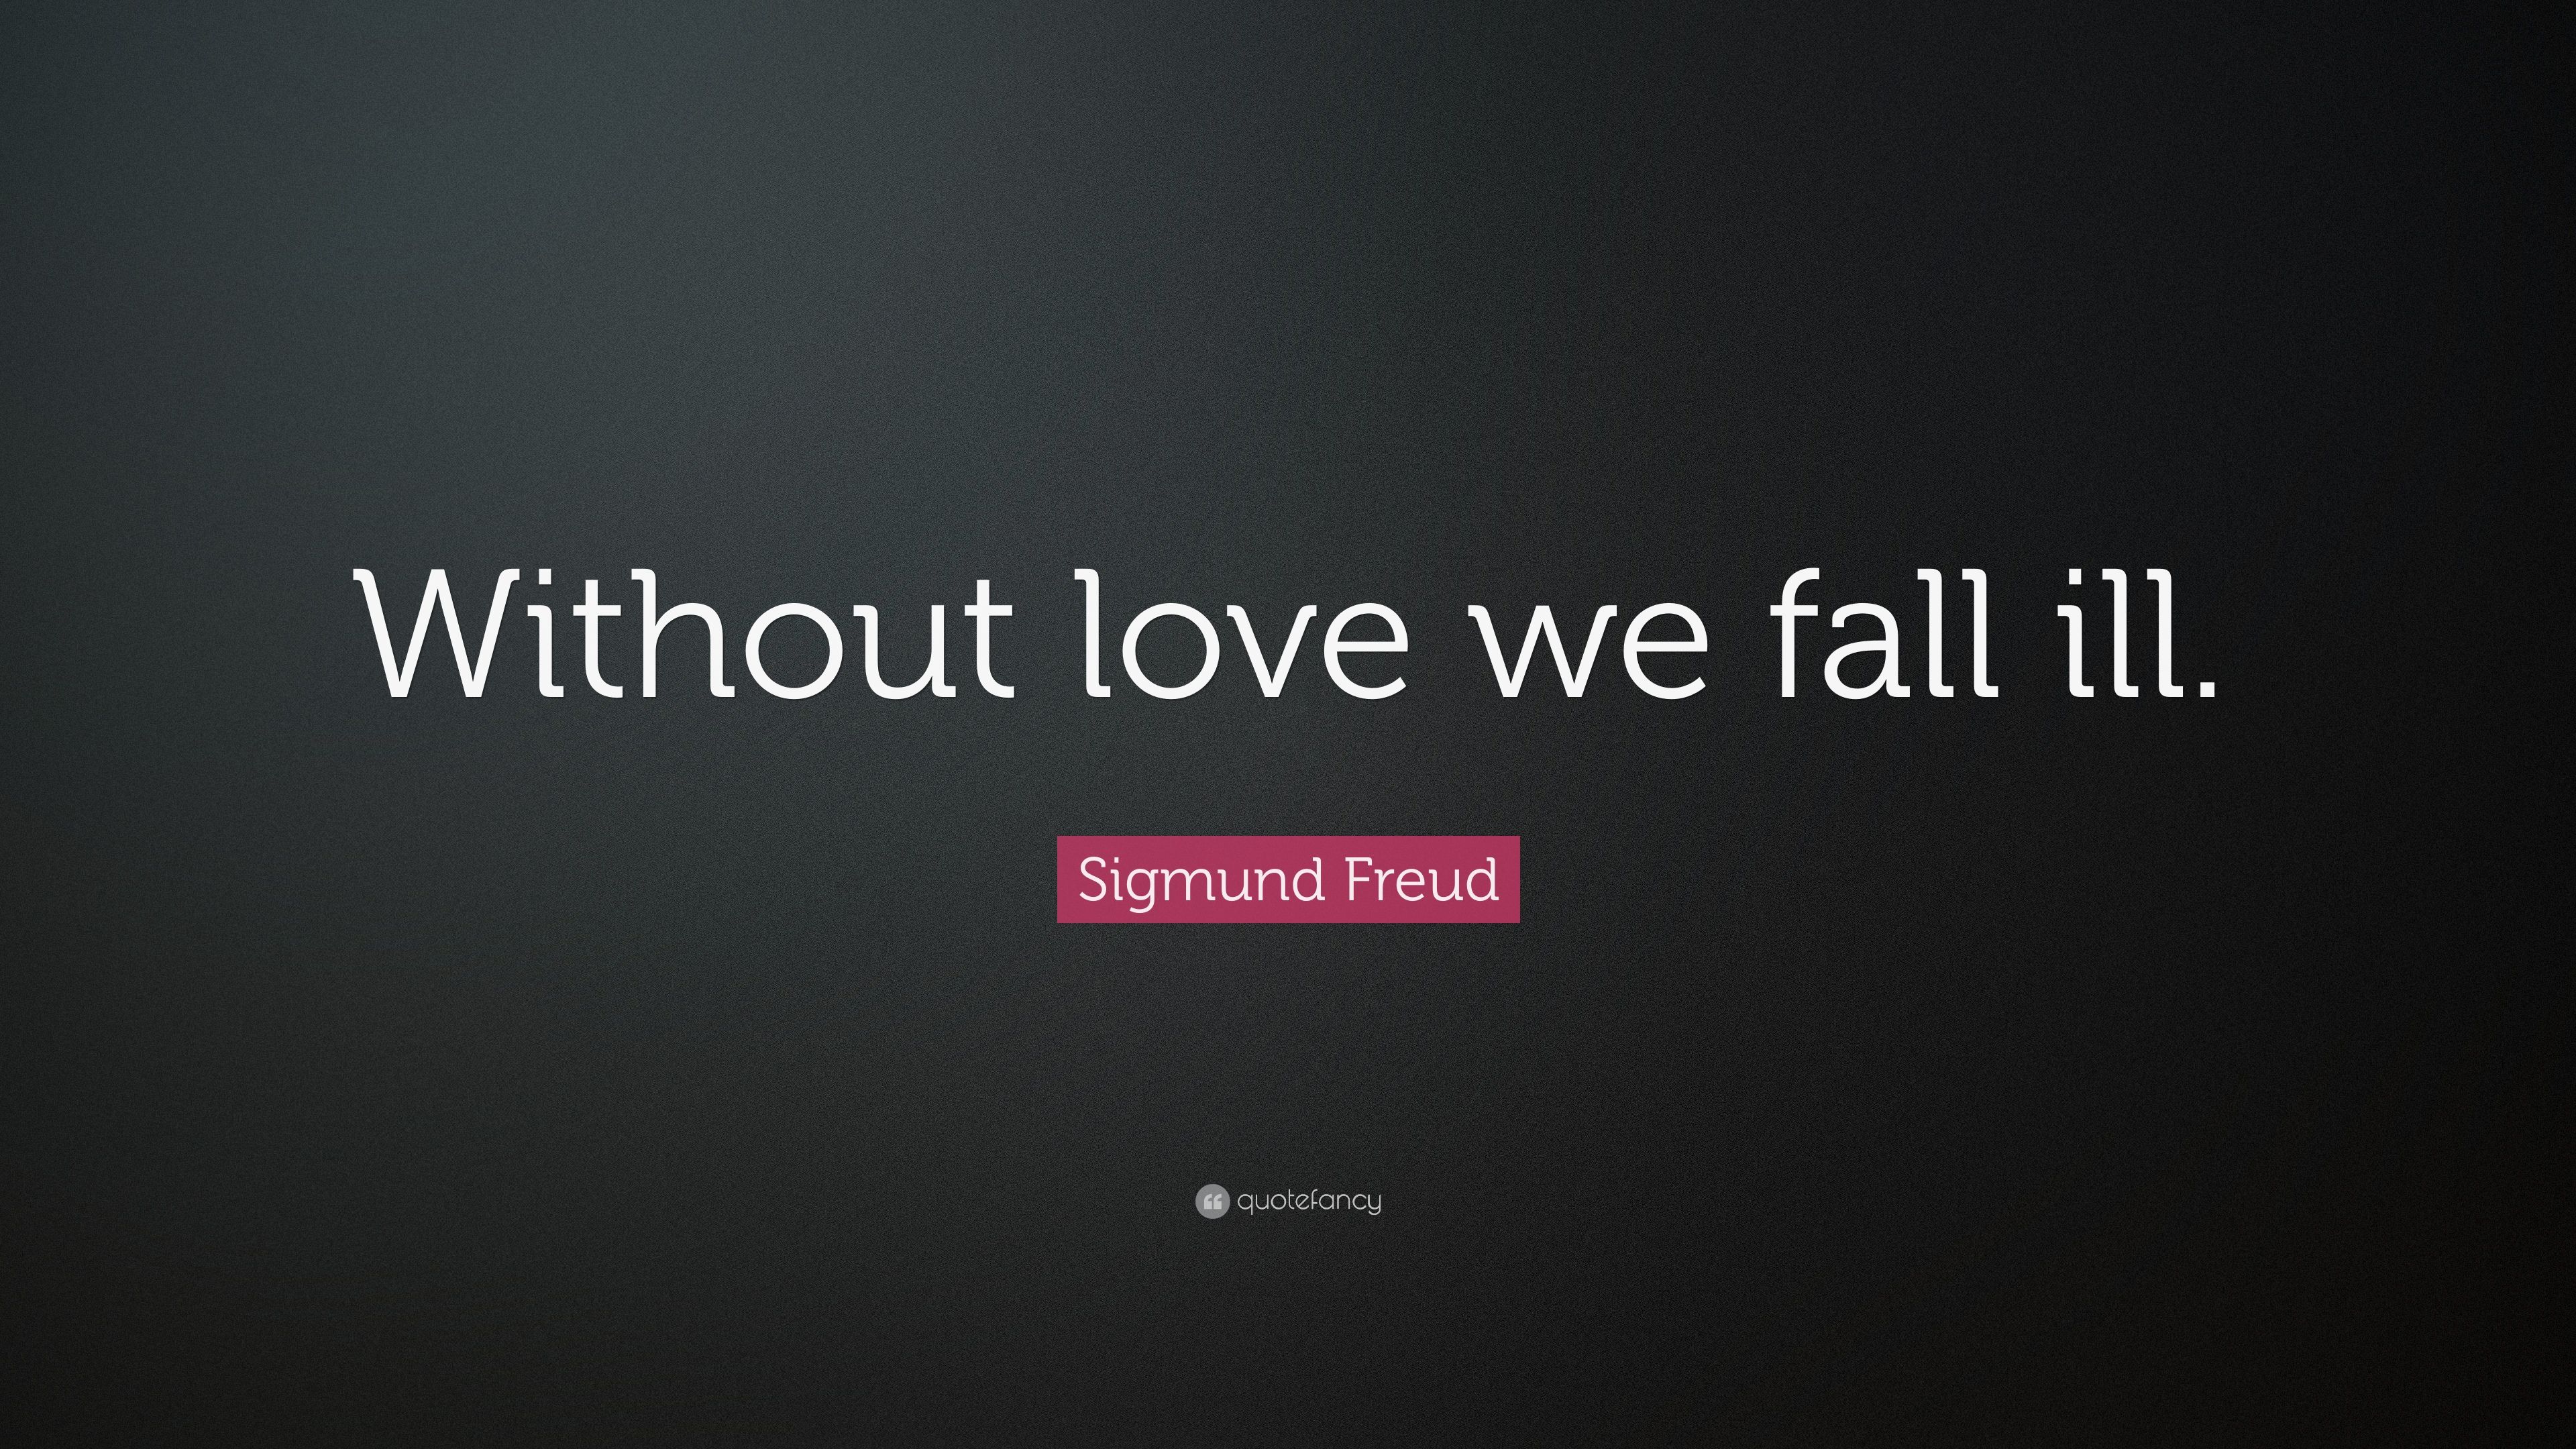 Sigmund Freud Quote: “Without love we fall ill.” 12 wallpaper